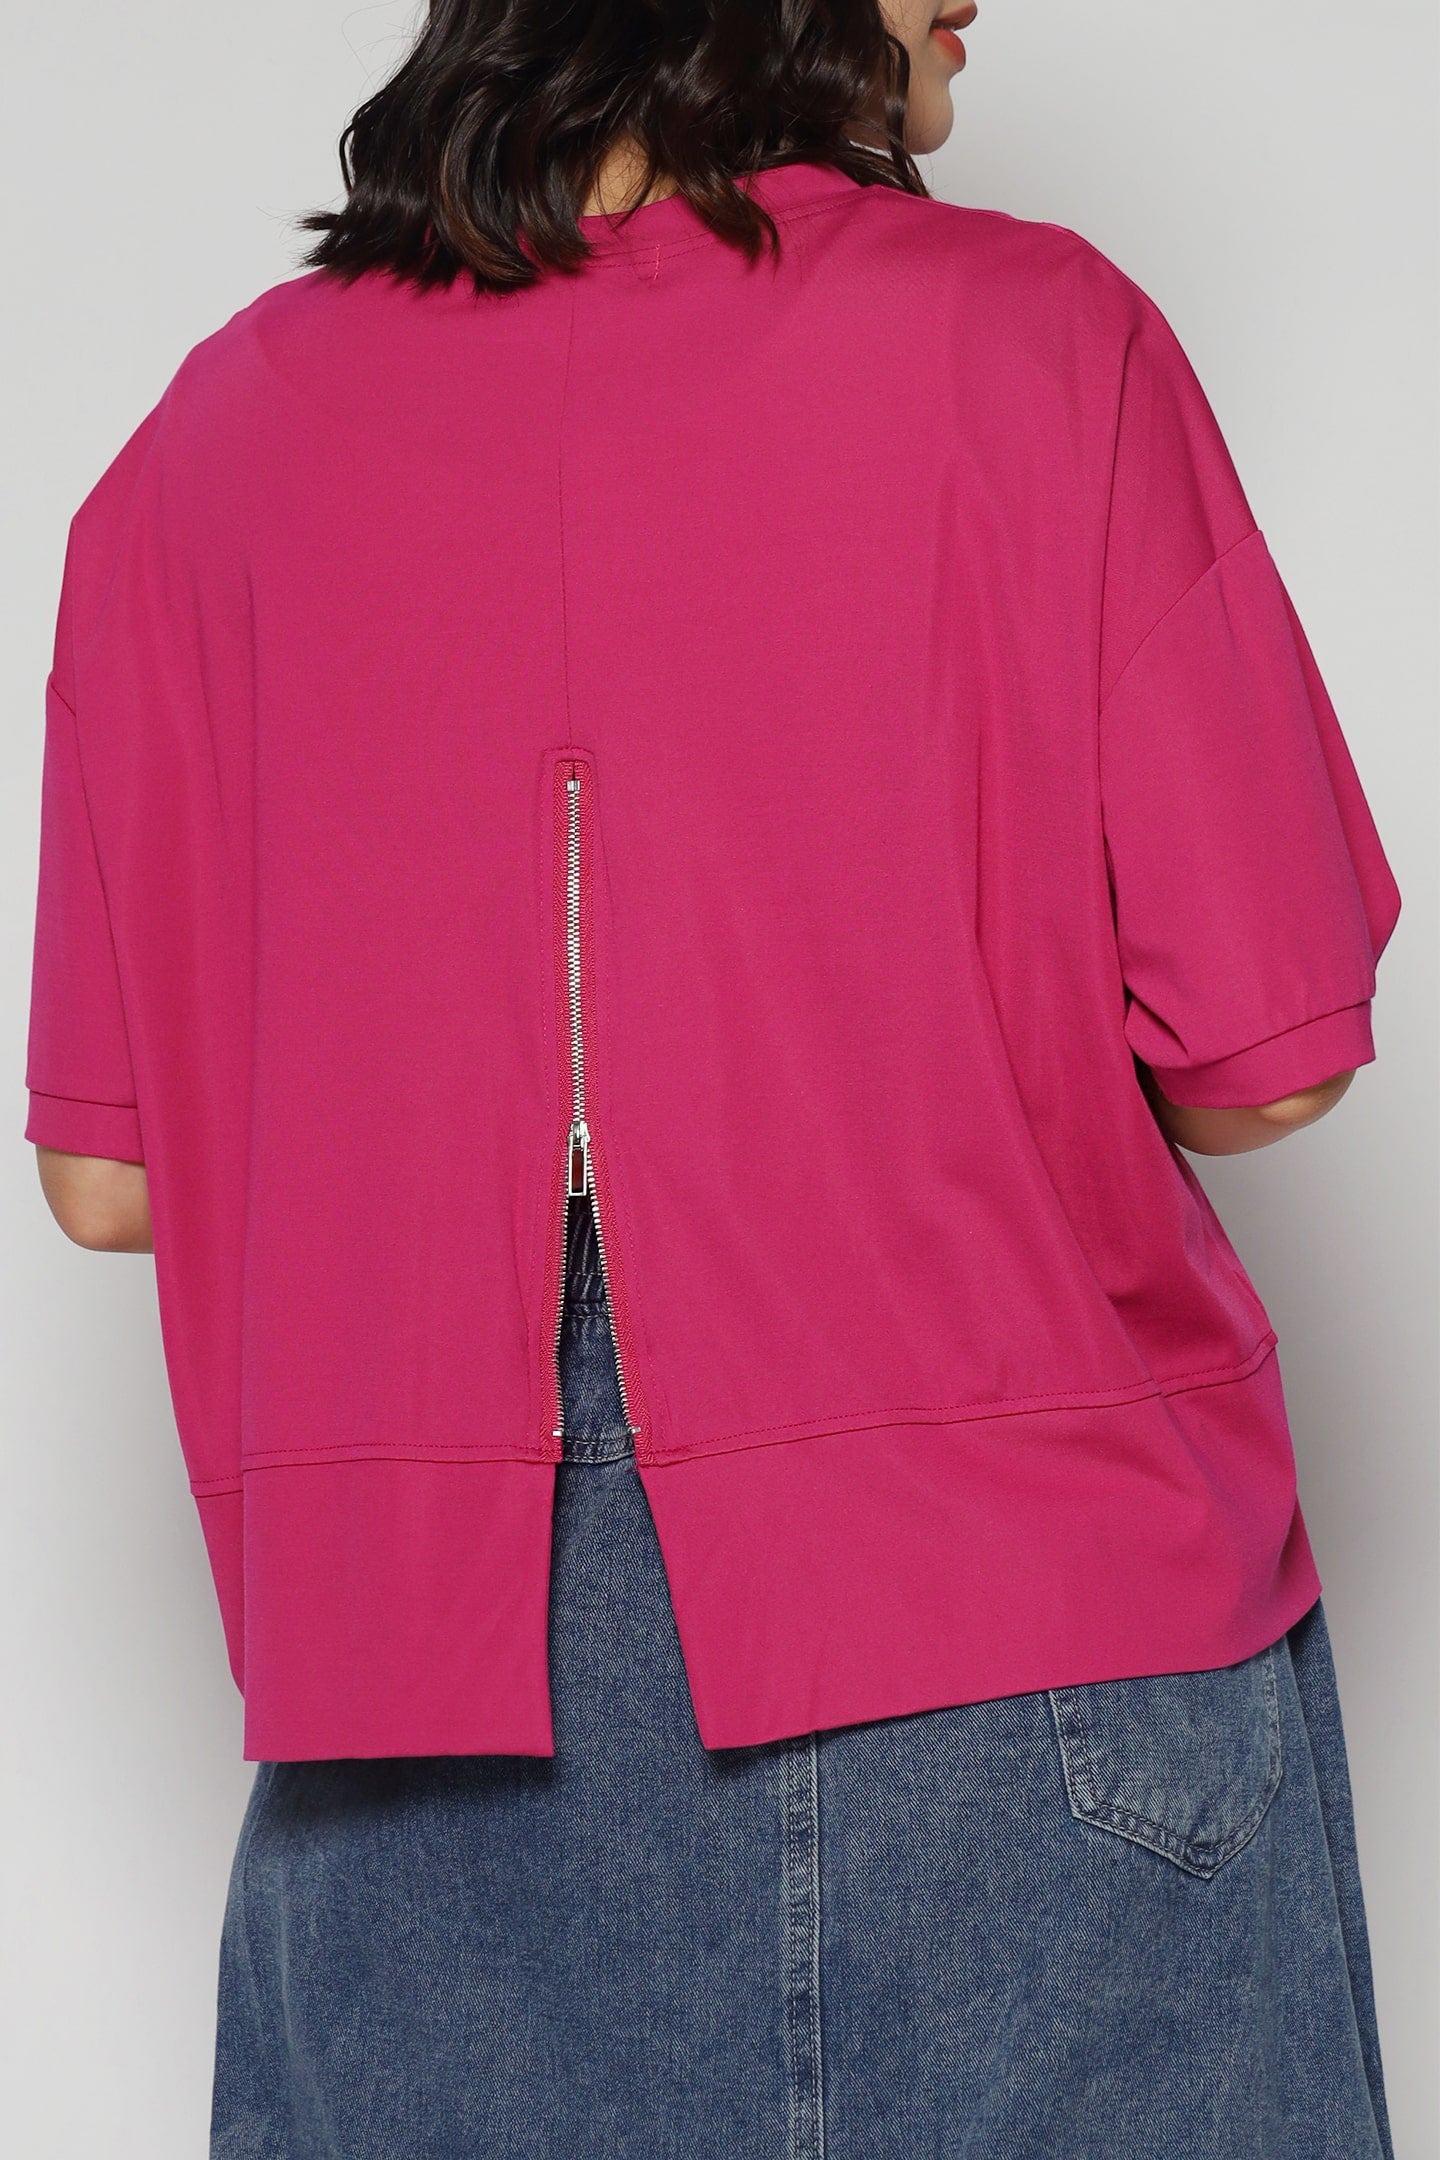 Baba Top in Pink